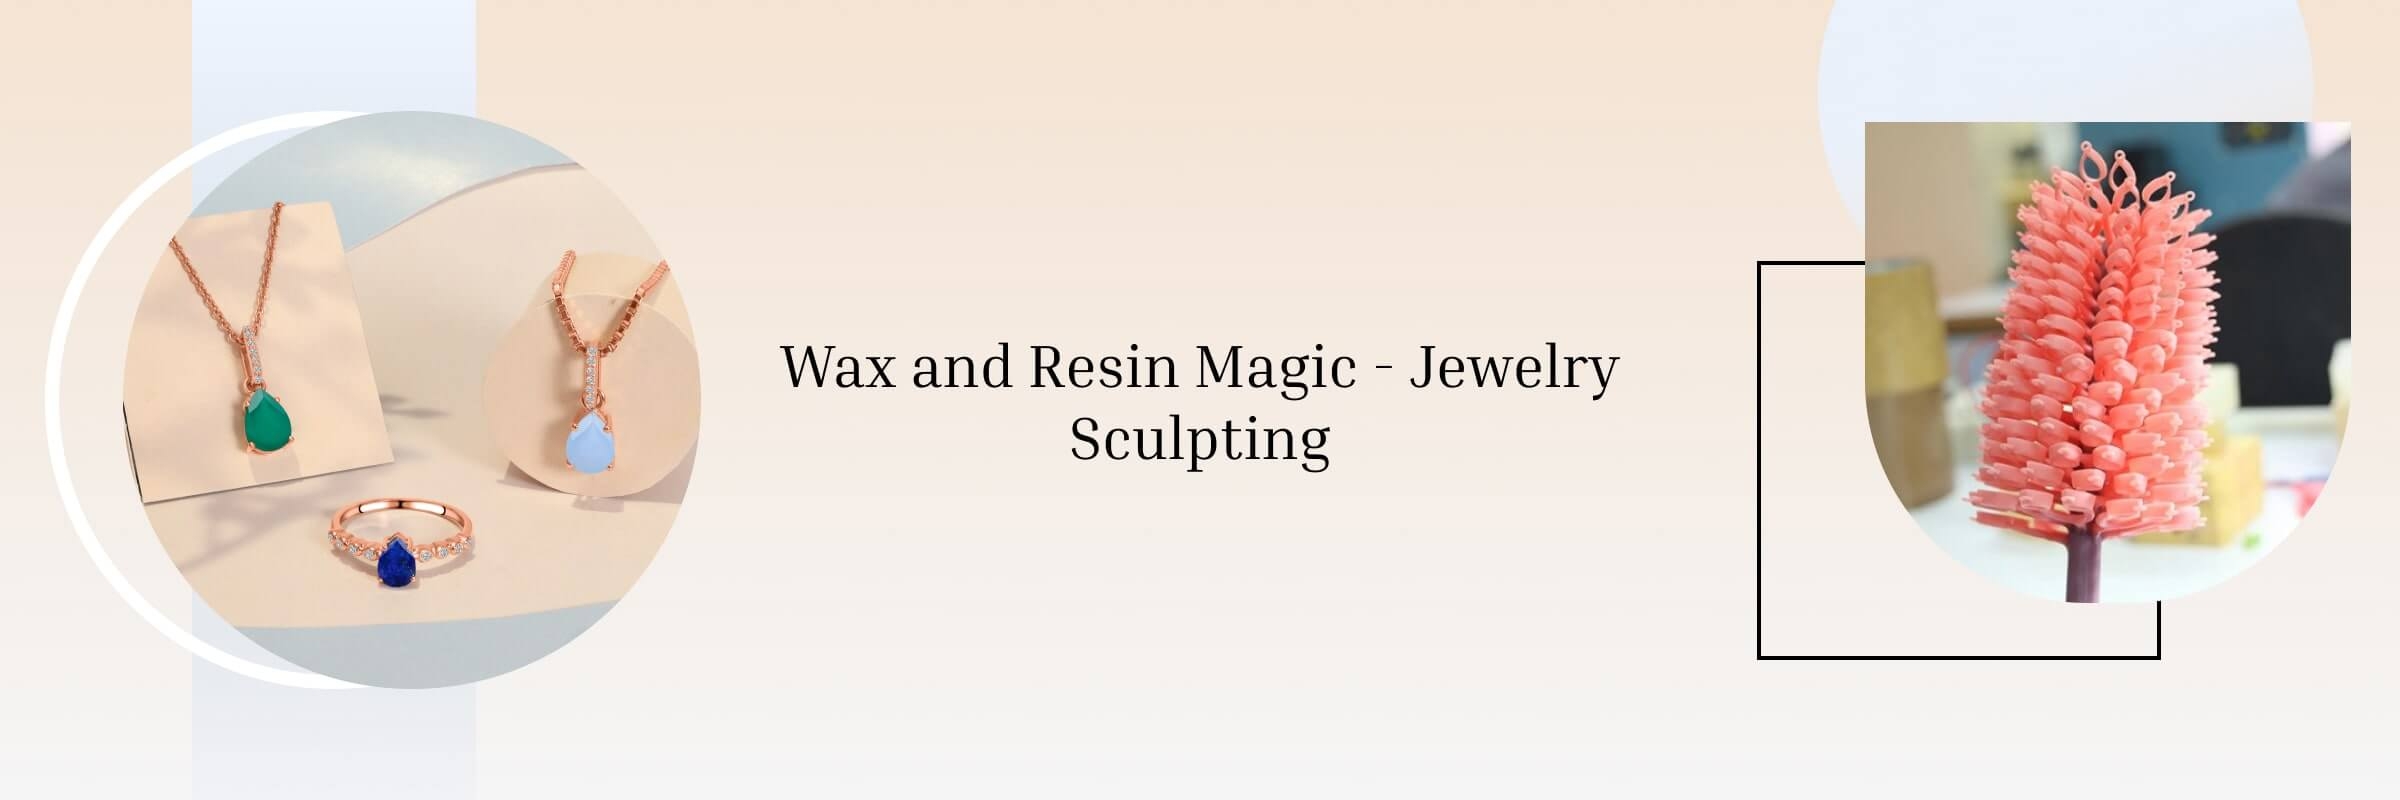 Wax or resin is used to sculpt the jewelry